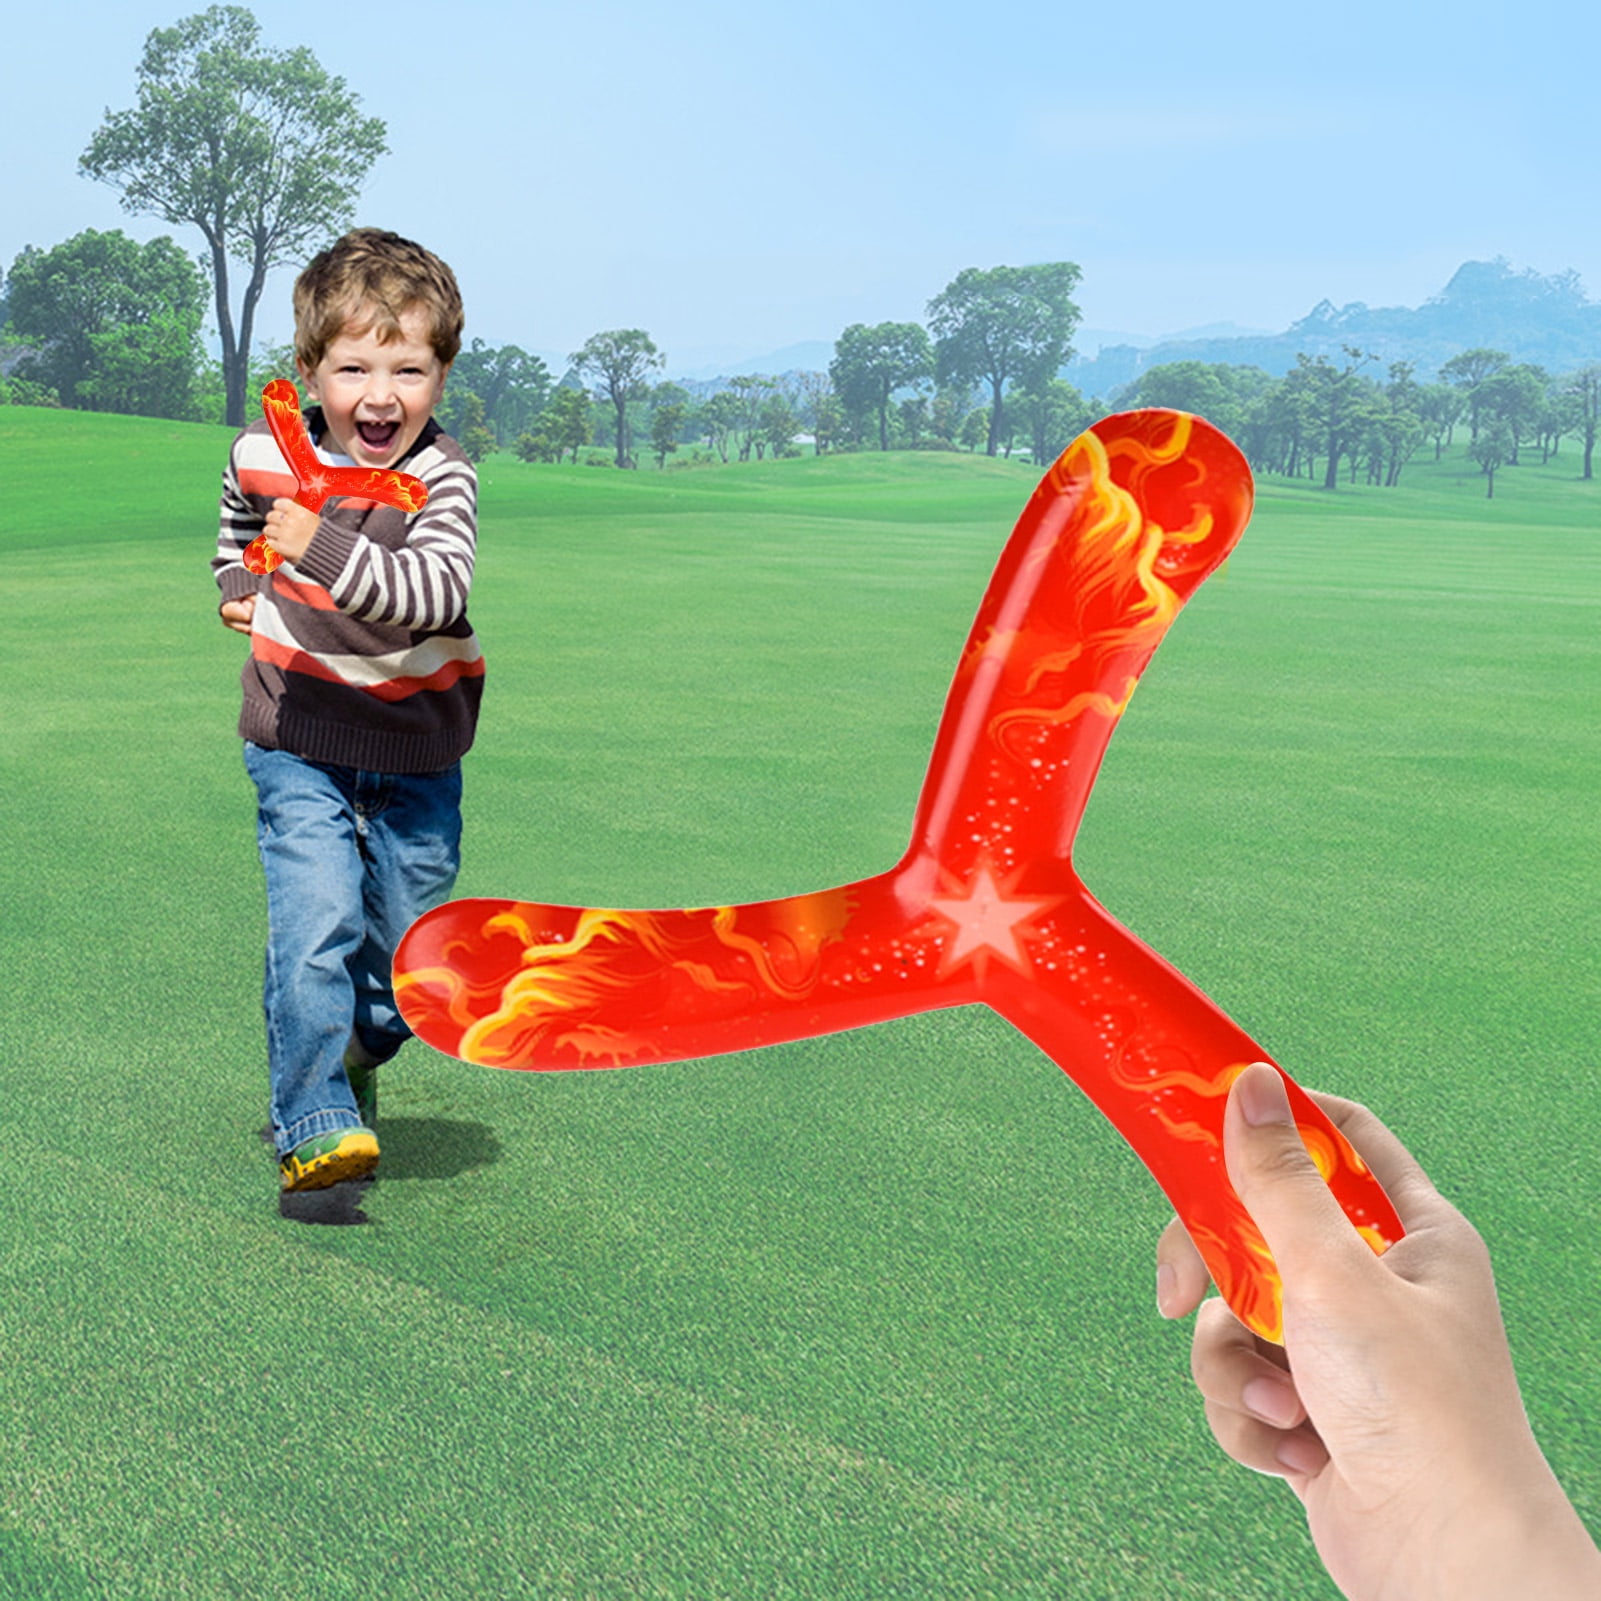 Boomerangs AIHOME Boomerangs Parent-child outdoor sports Throwers game,Outdoor Recreational Children Throwing Sports Toy